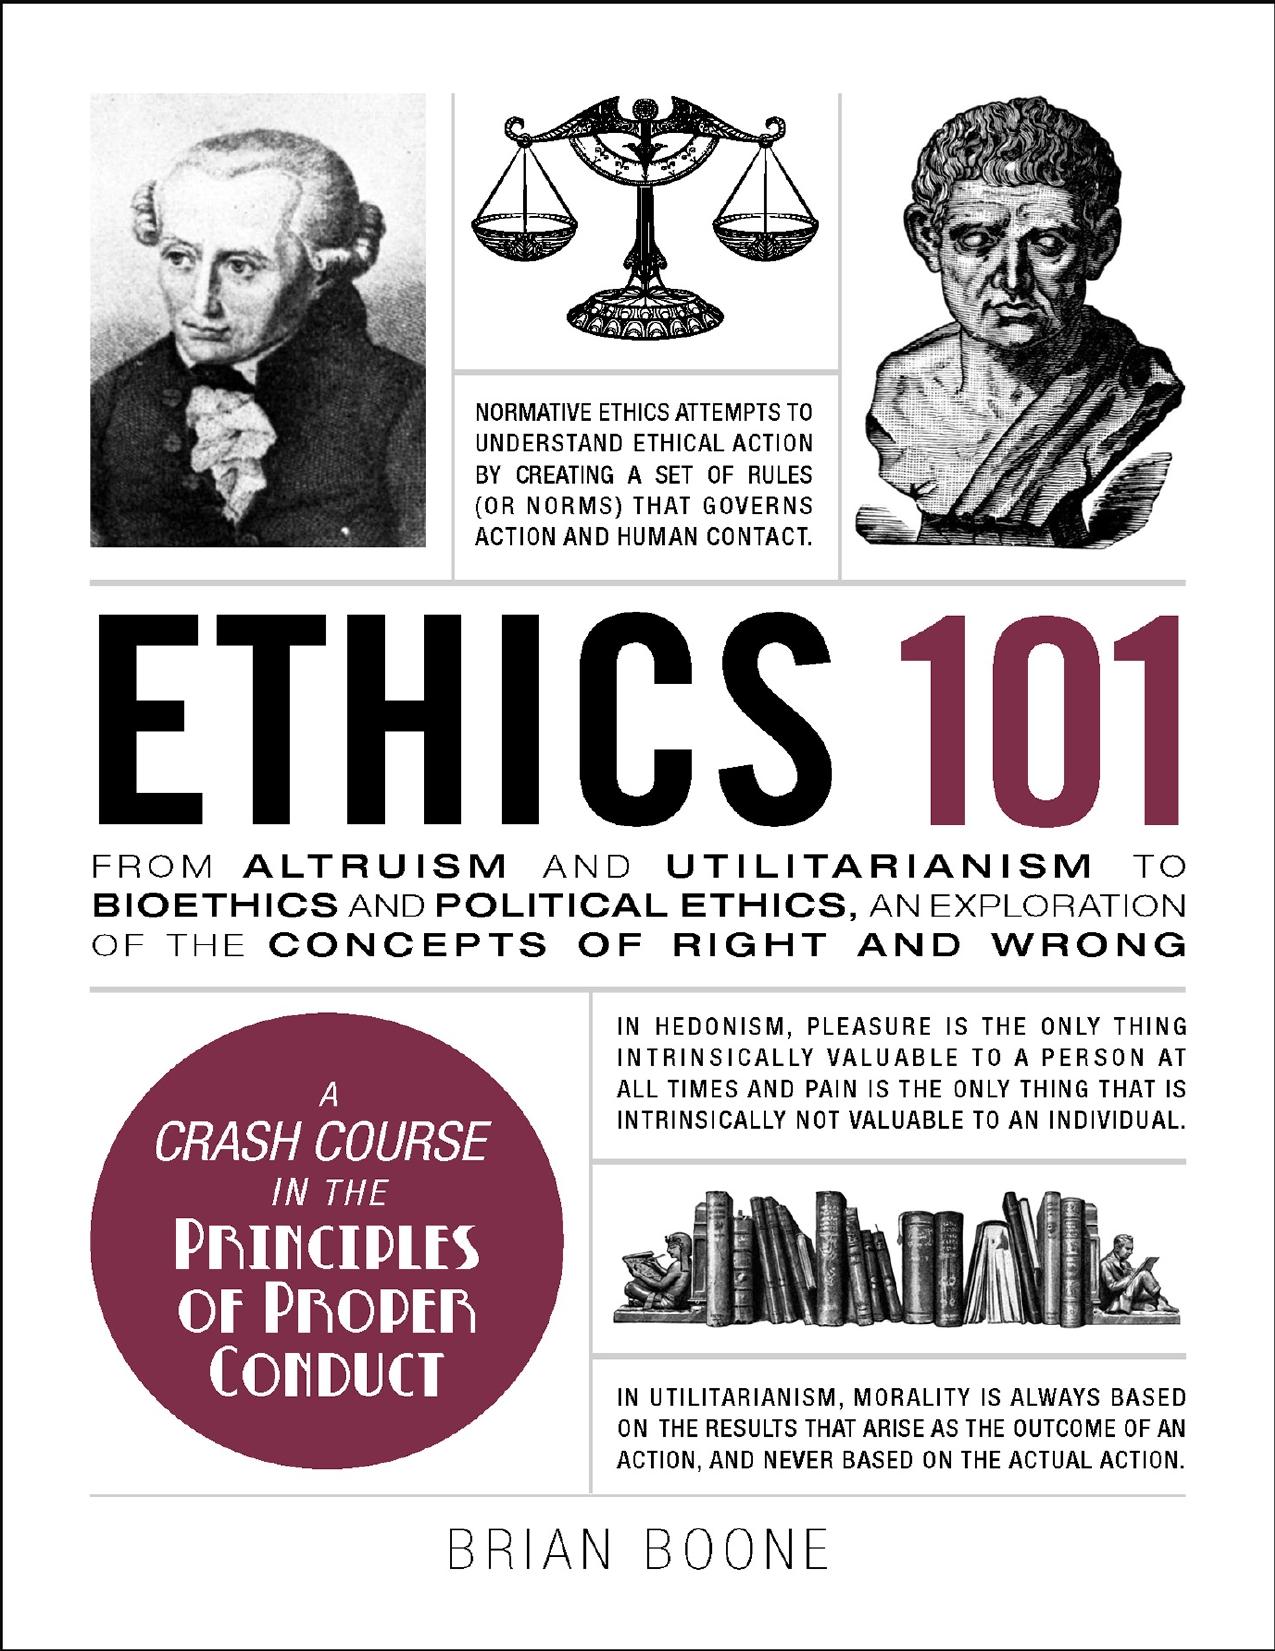 Ethics 101: From Altruism and Utilitarianism to Bioethics and Political Ethics, an Exploration of the Concepts of Right and Wrong - PDFDrive.com